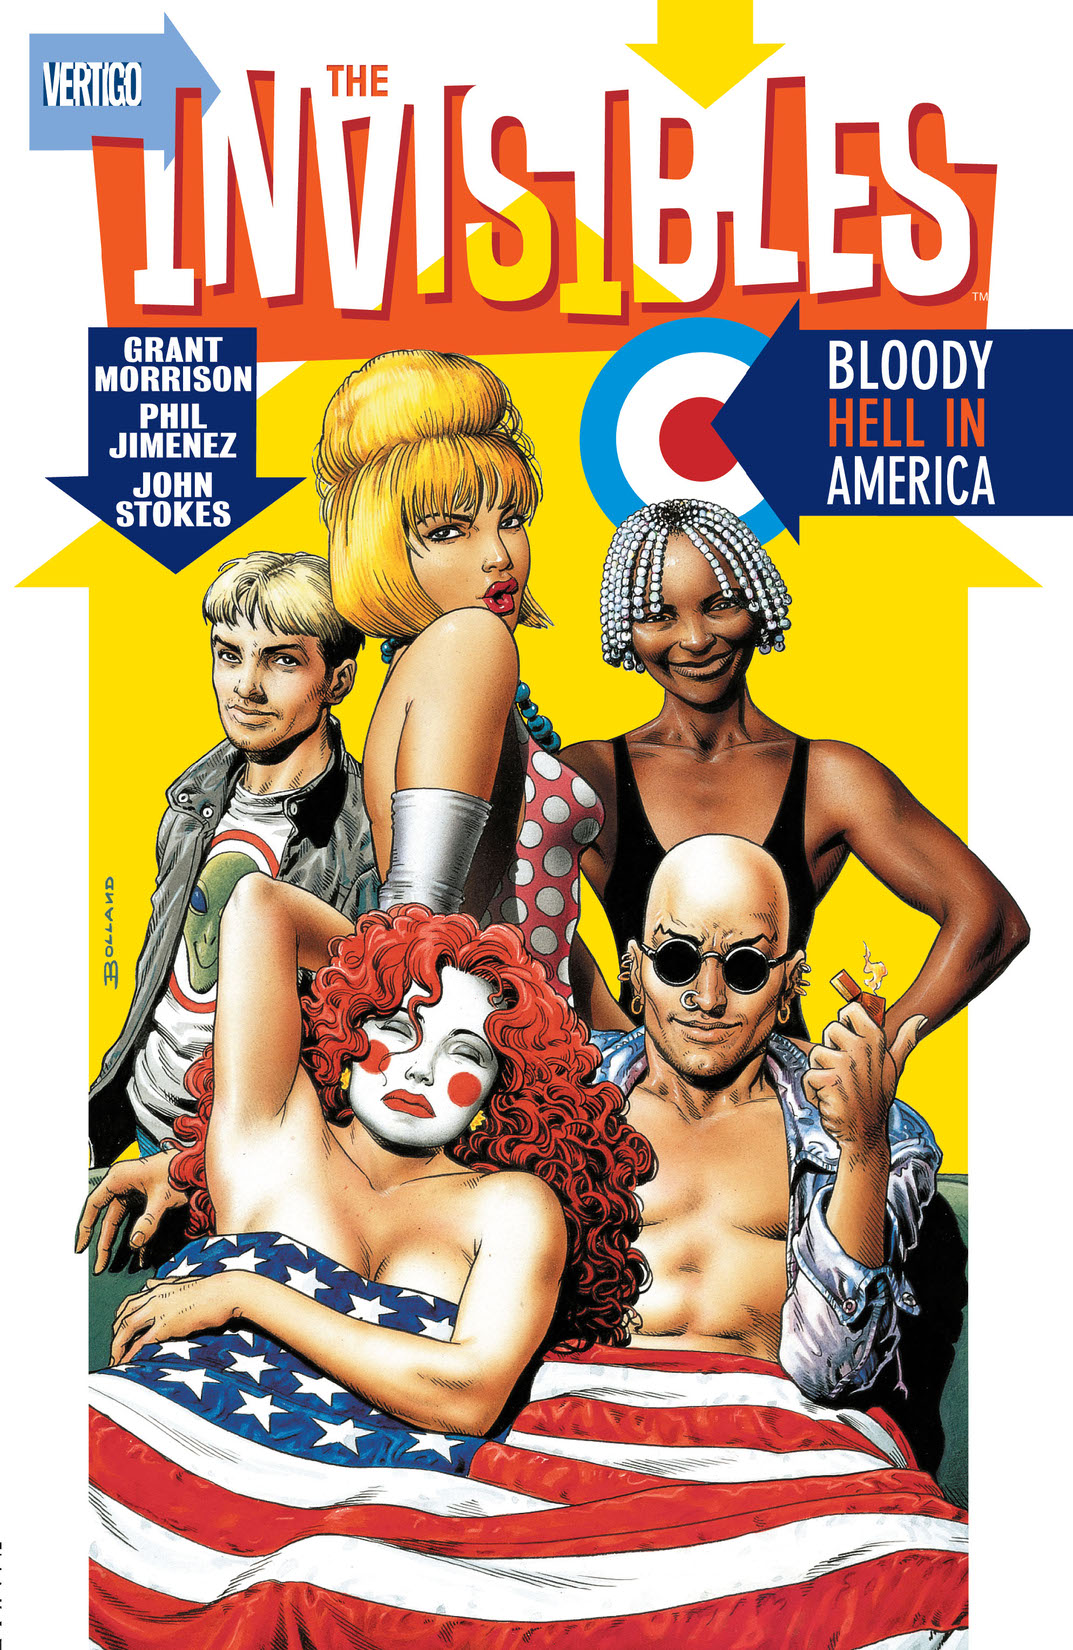 The Invisibles Vol. 4: Bloody Hell In America preview images